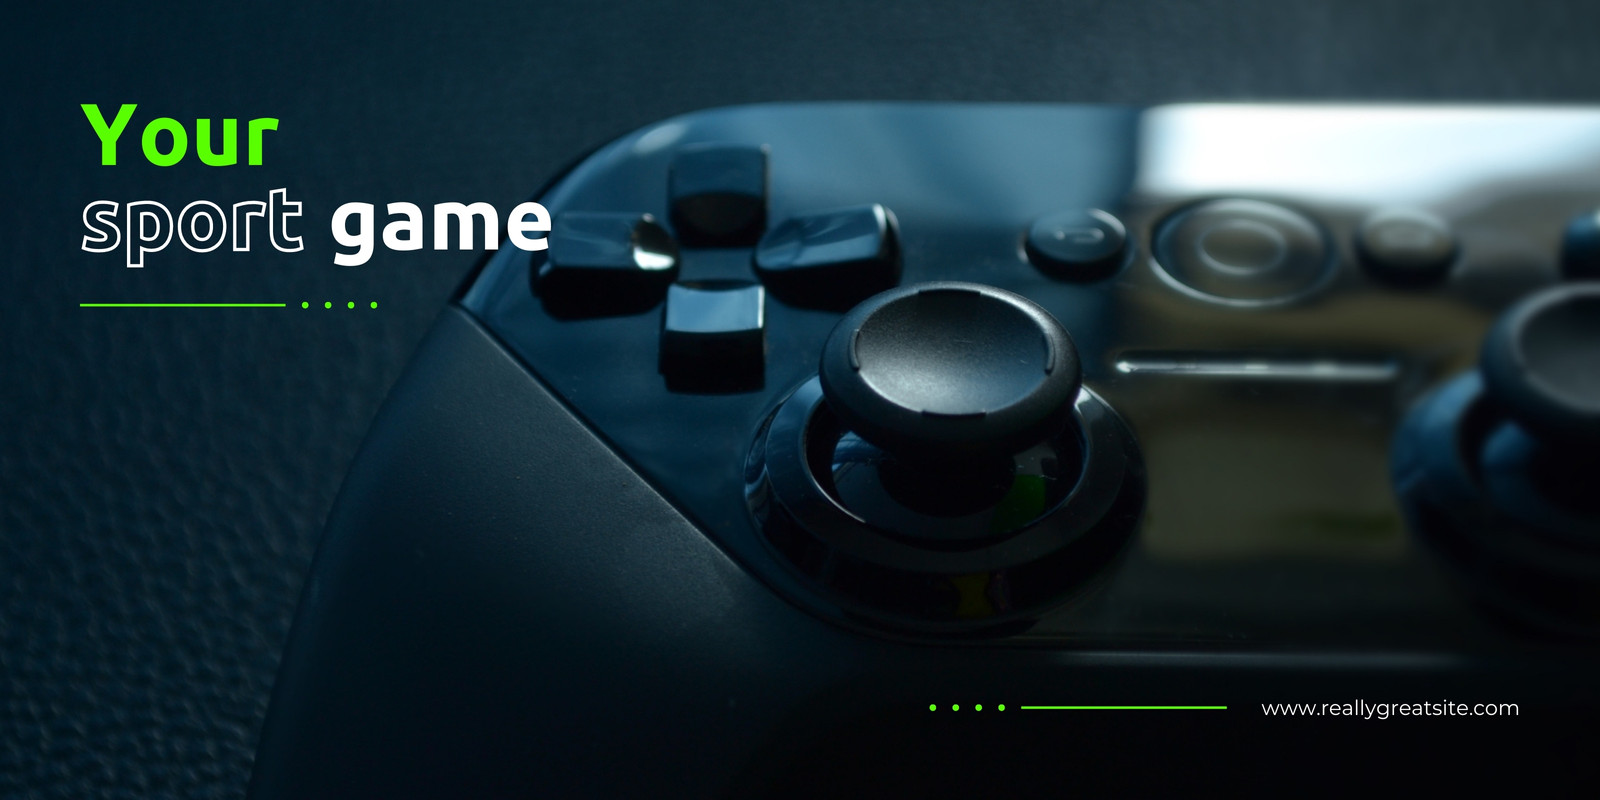 Customize 38+ Gaming Banner Templates Online - Canva